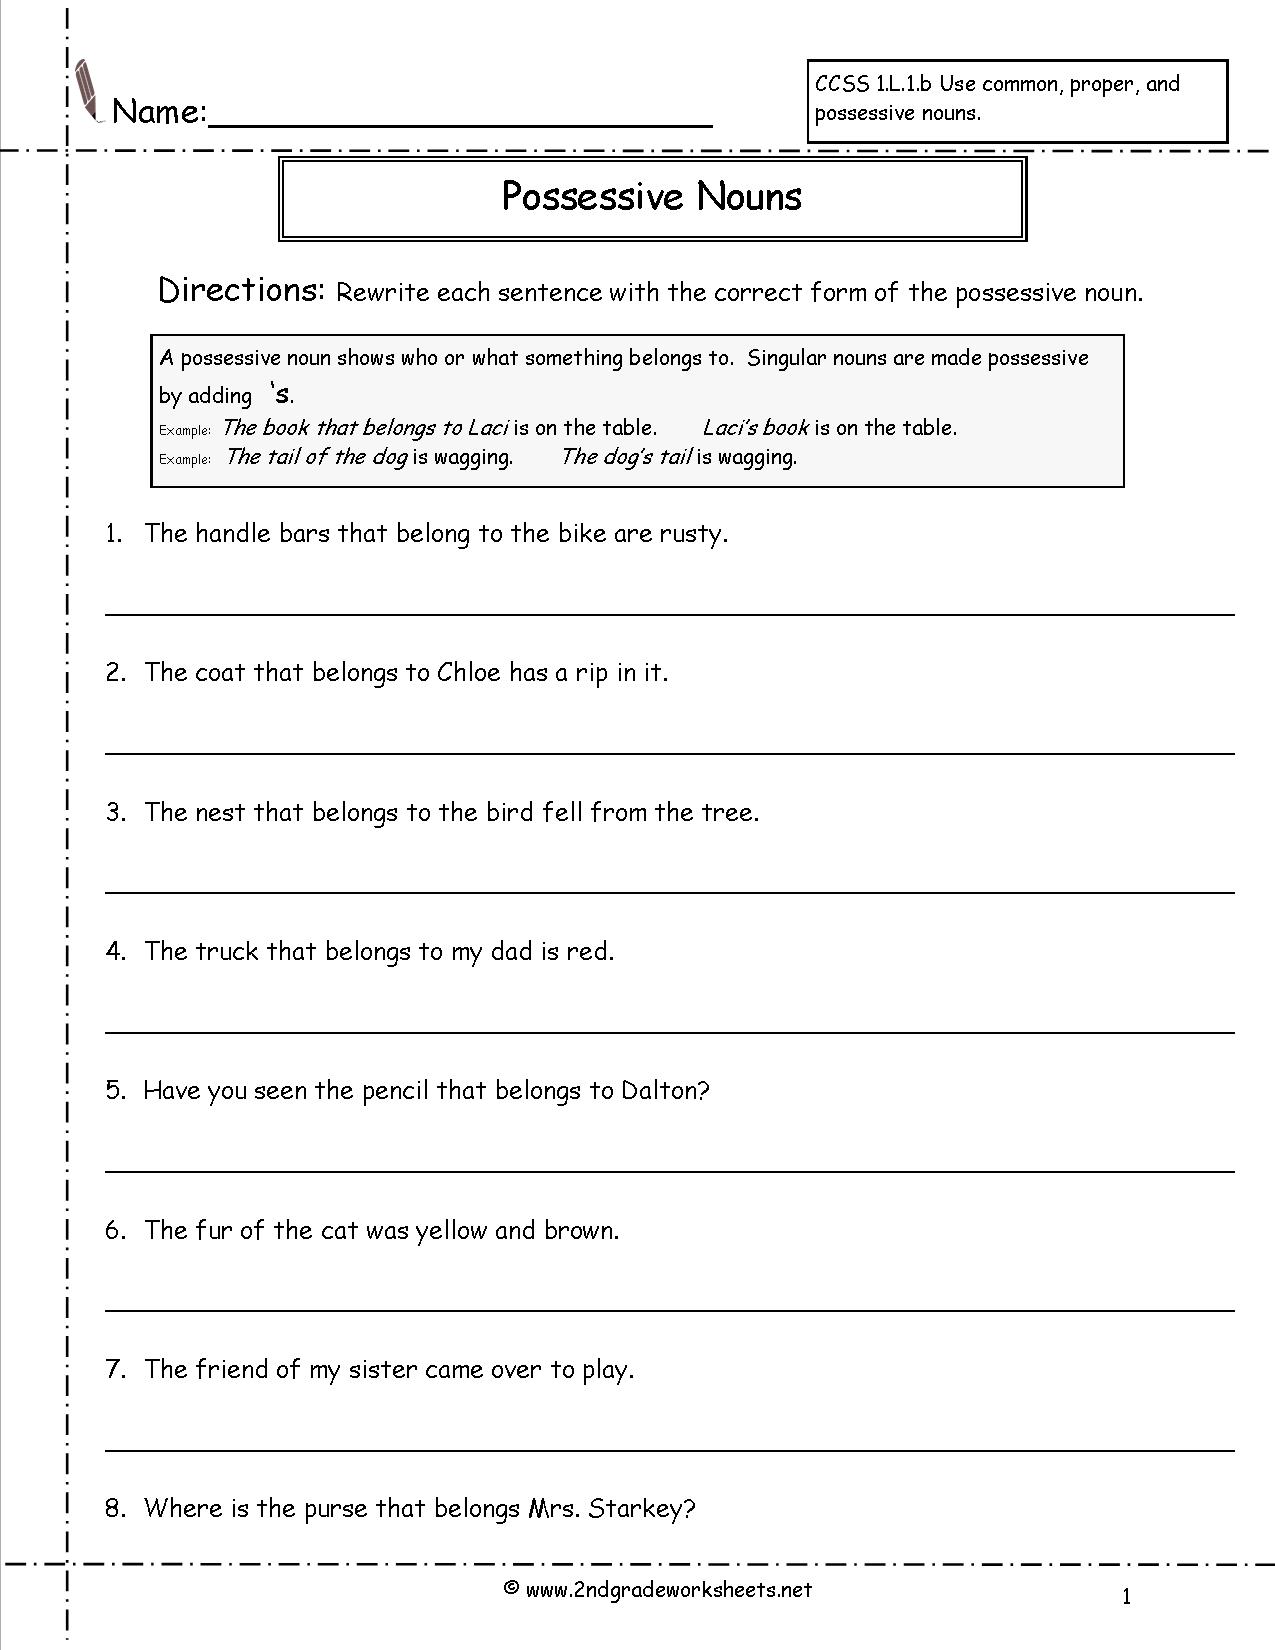 15 Best Images Of Possessive Nouns Worksheets 5th Grade Singular Possessive Nouns Worksheet